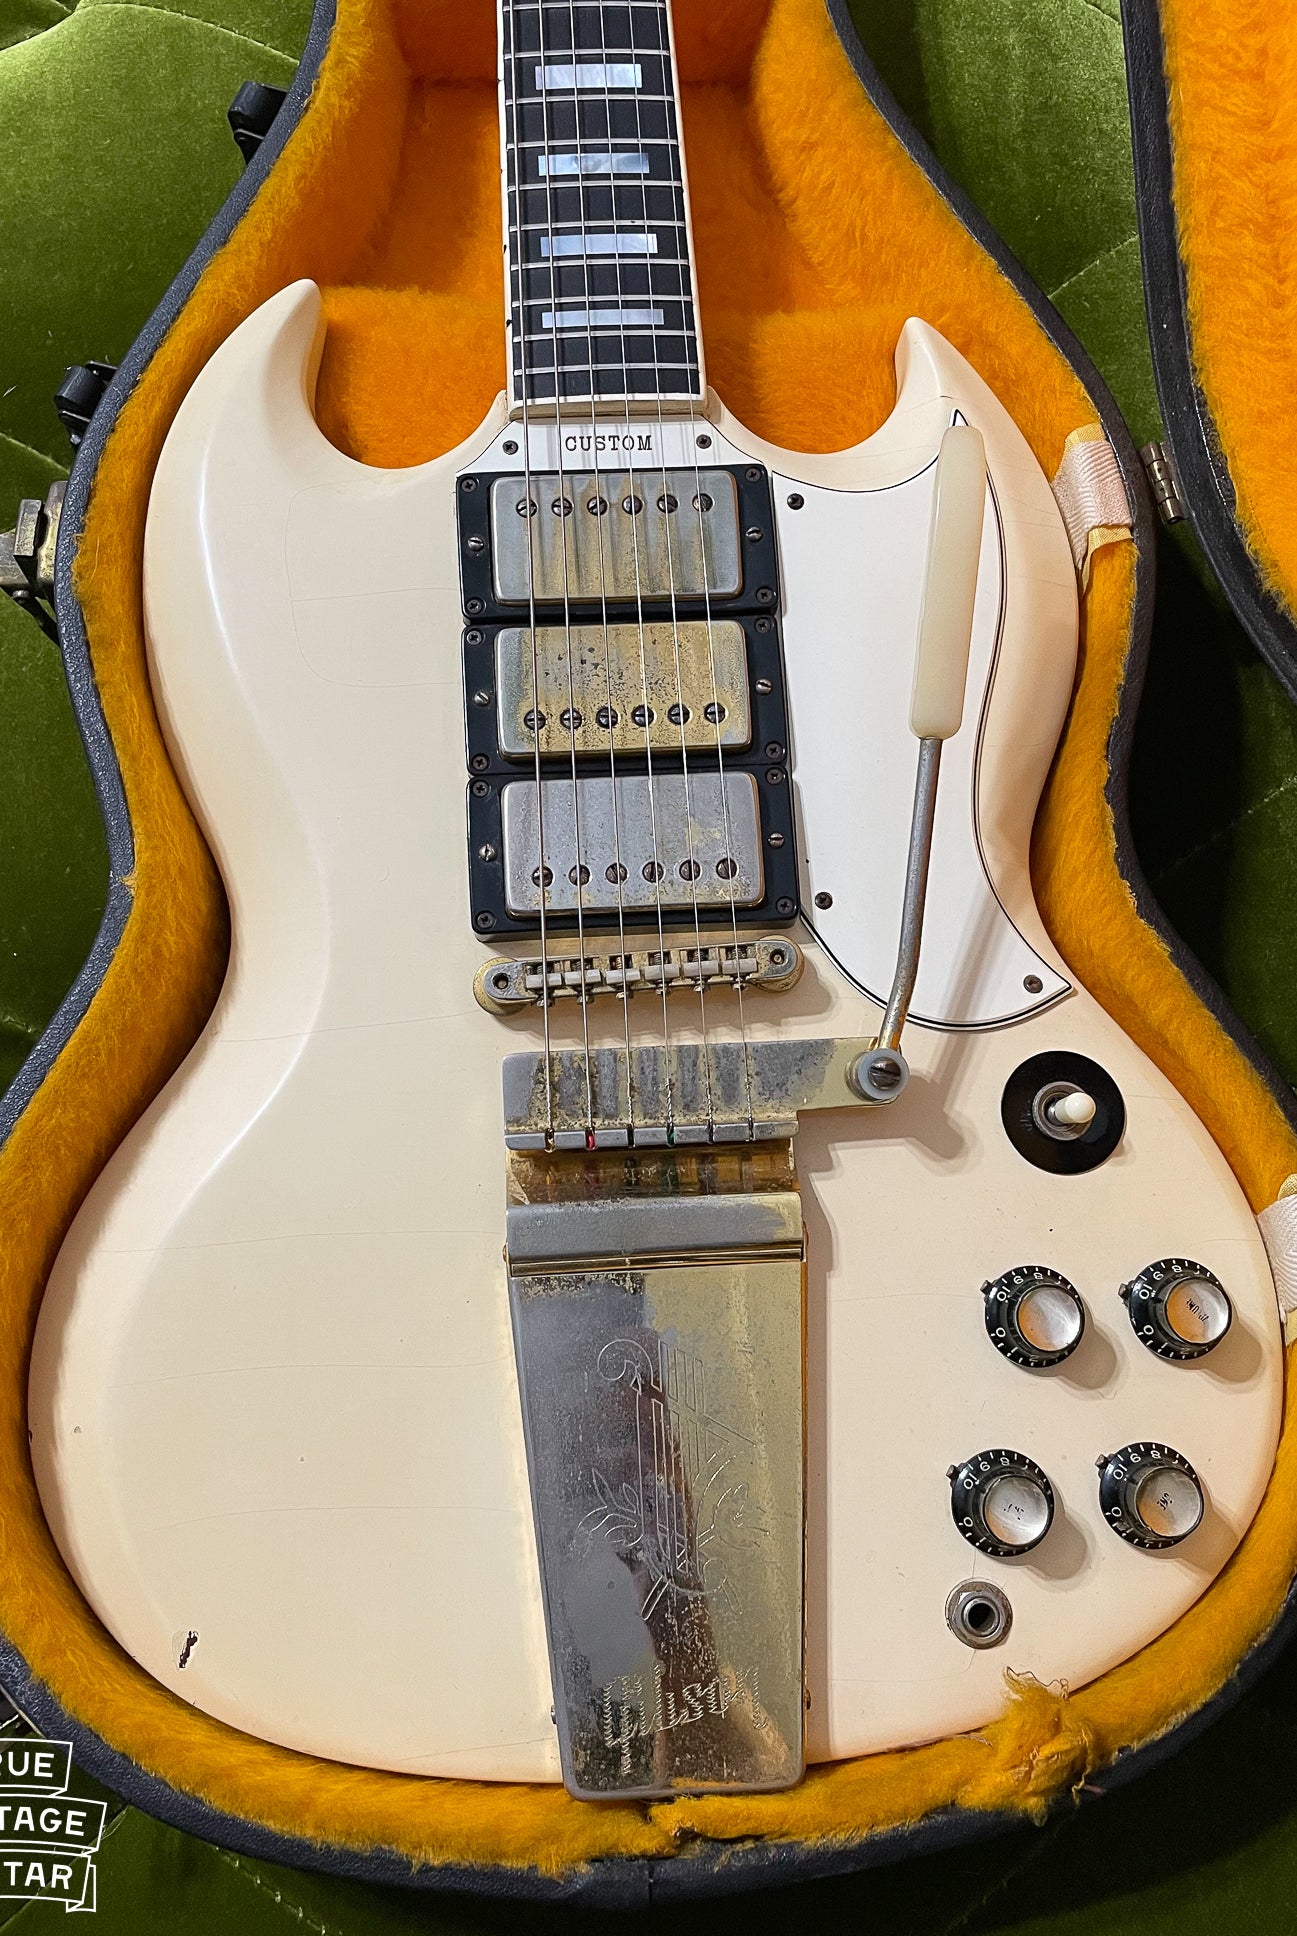 1964 Gibson SG Custom electric guitar with white finish and three pickups